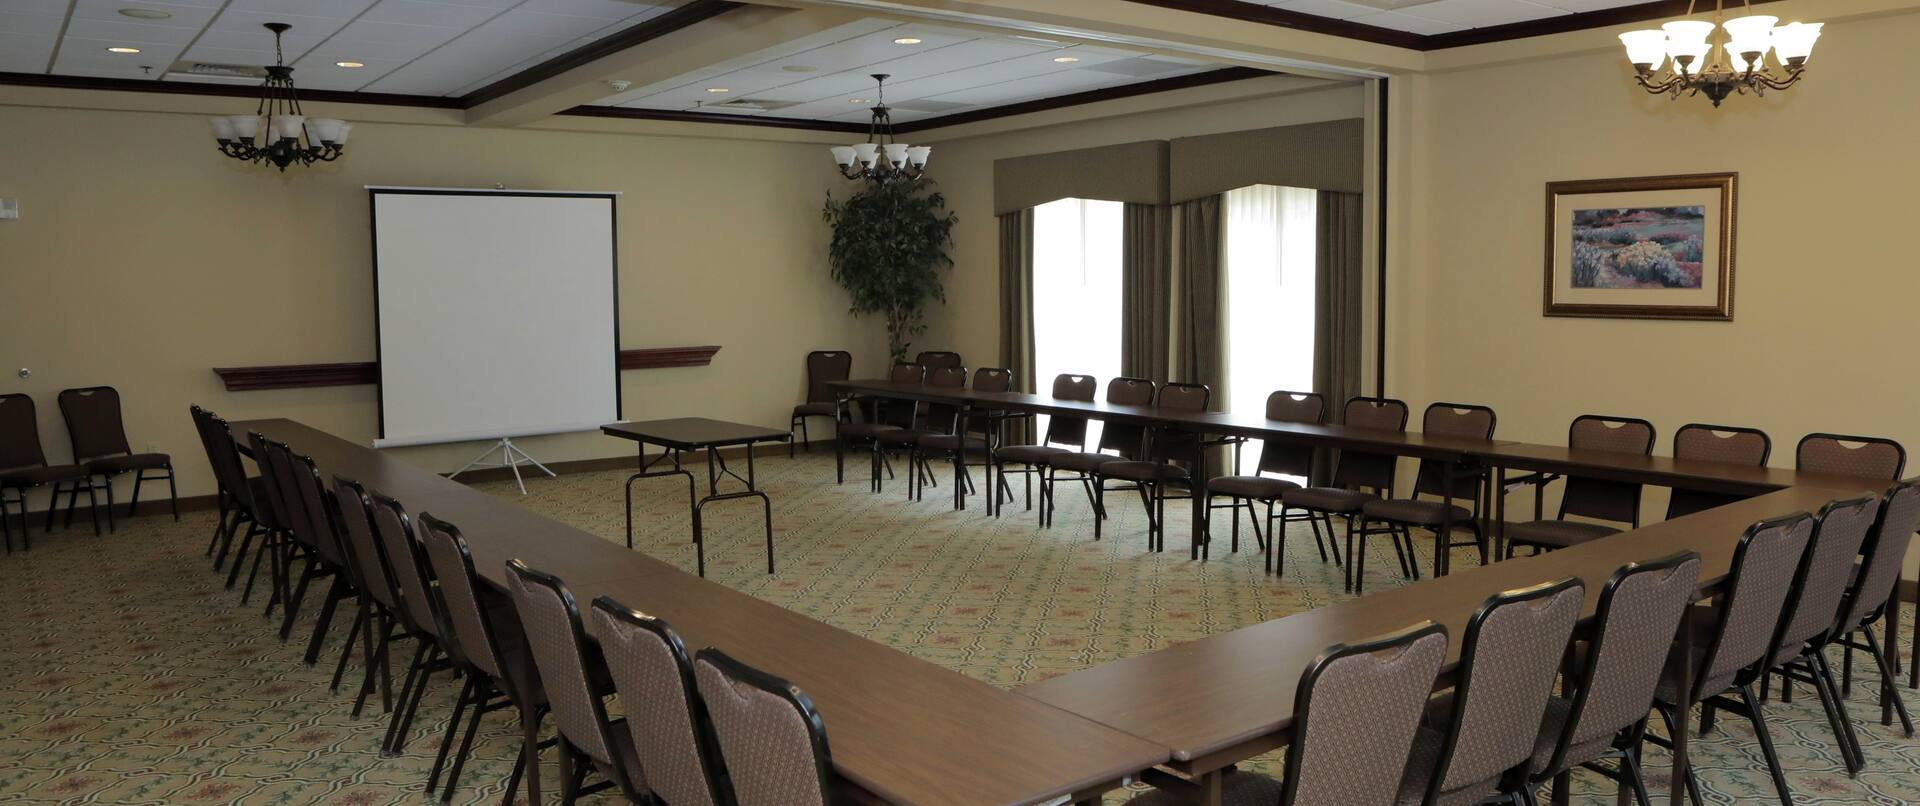 Meeting Room with U-shaped set-up and projector